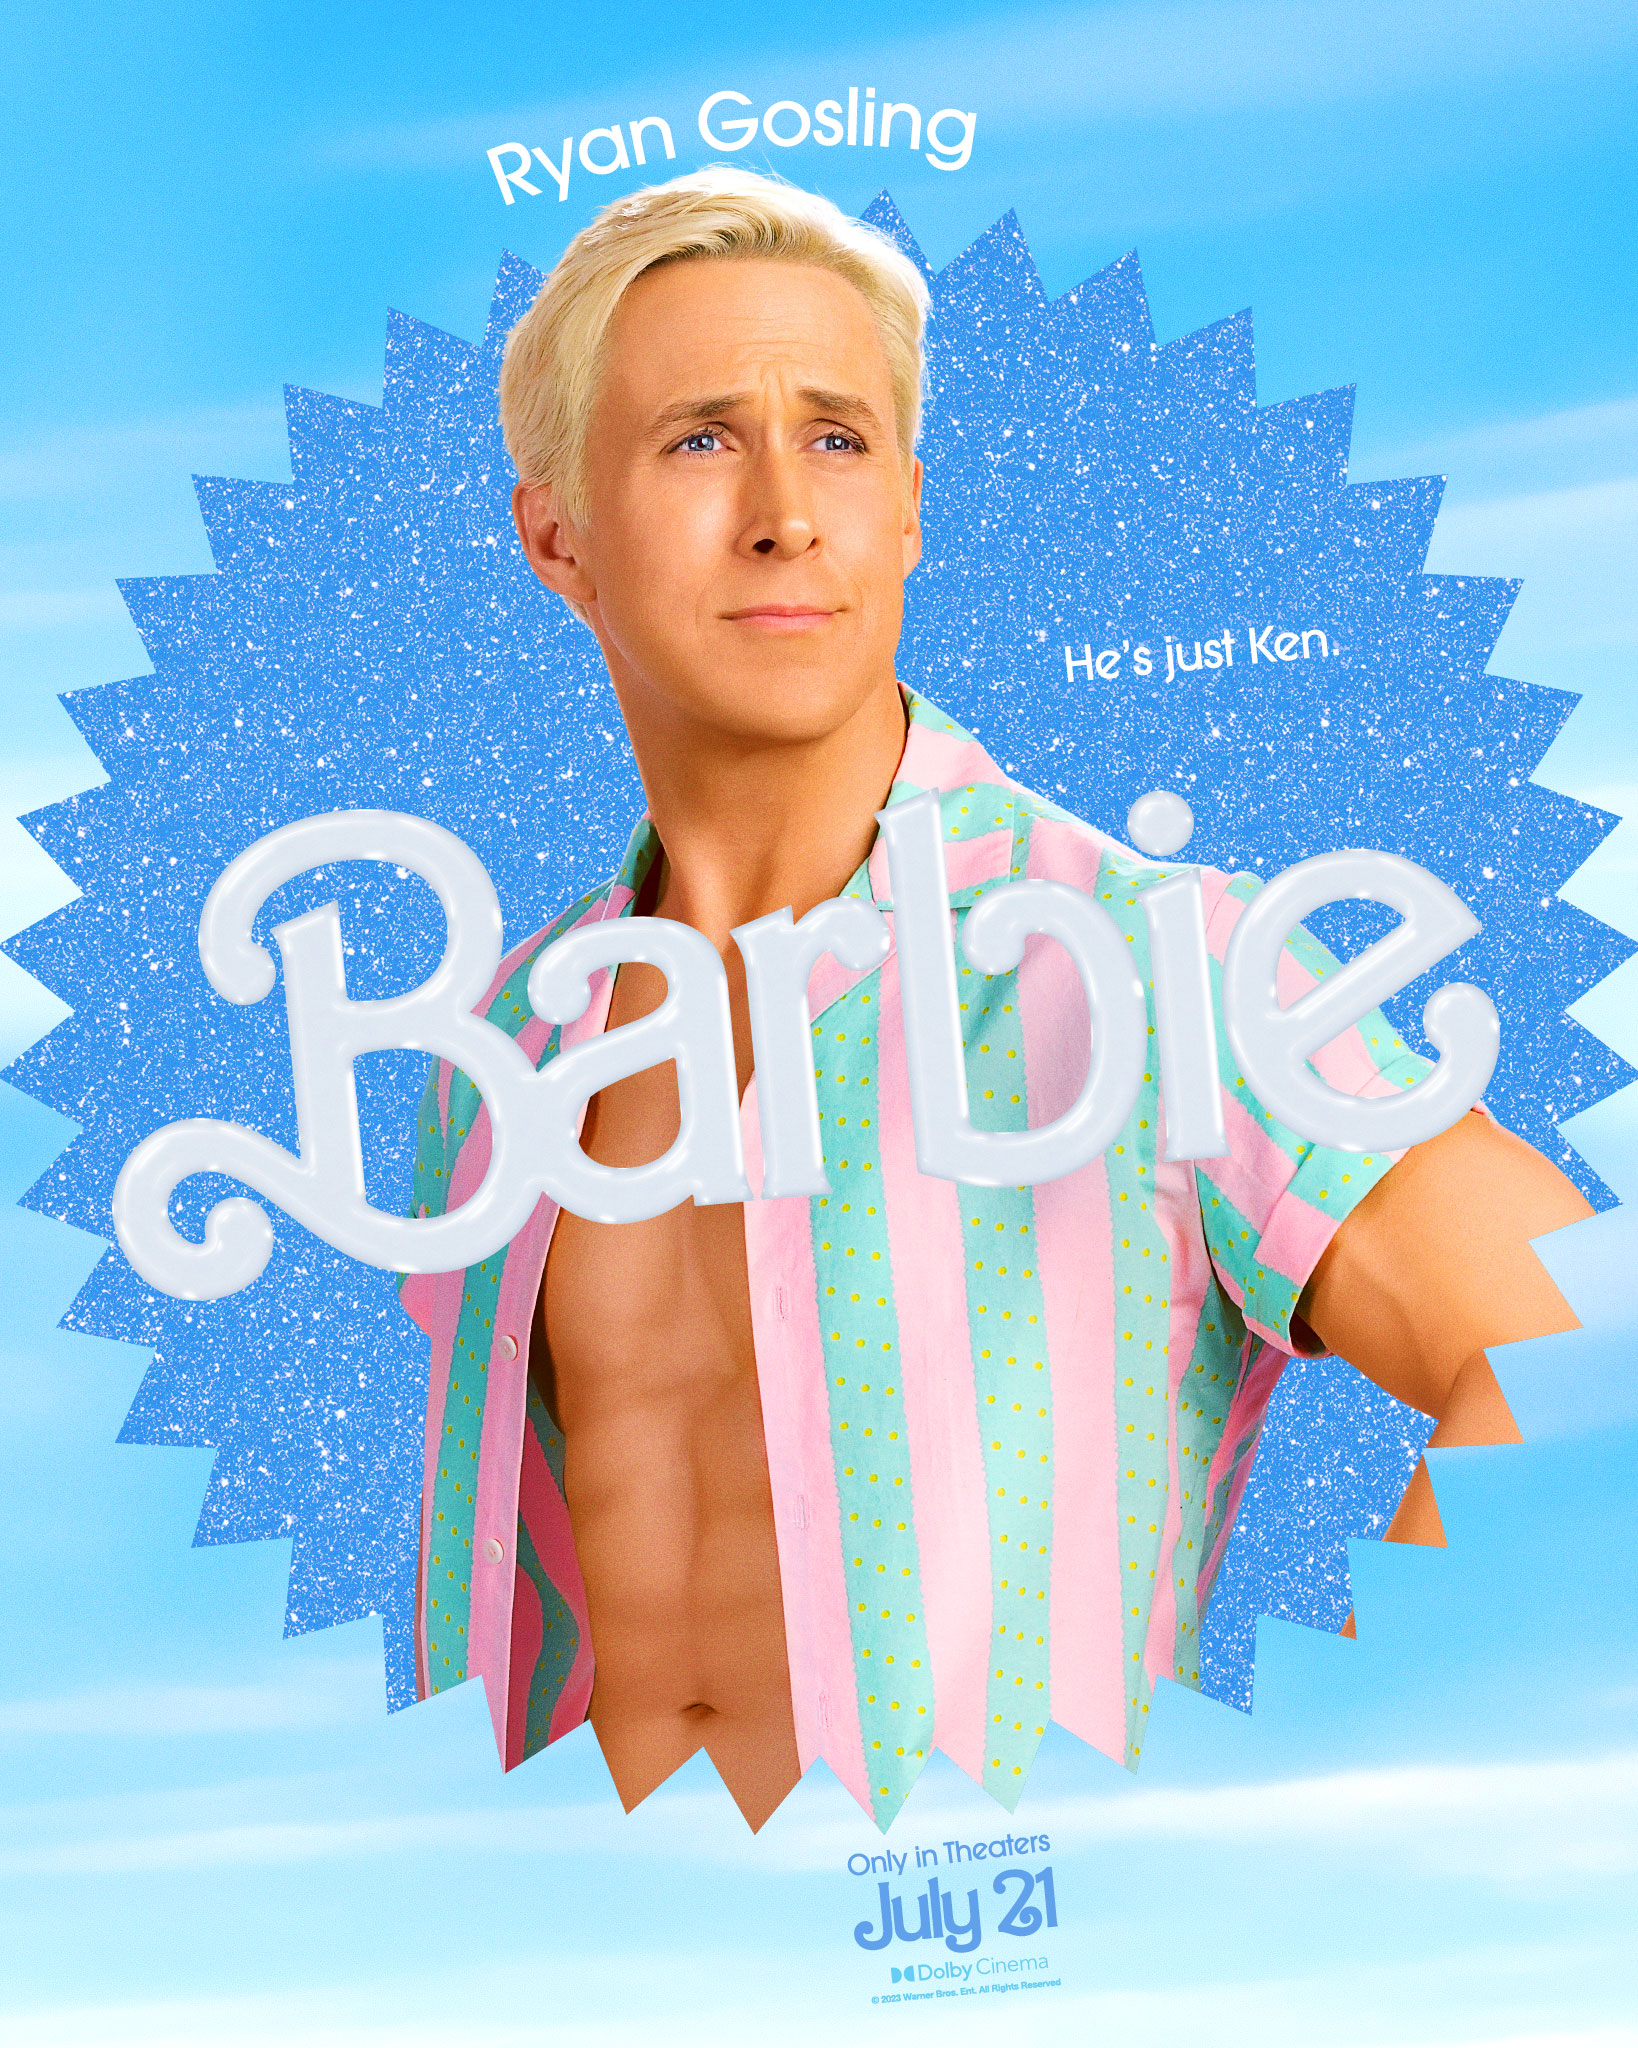 Because"Barbie Girl" of Aqua will not appear in the movie 'Barbie'?